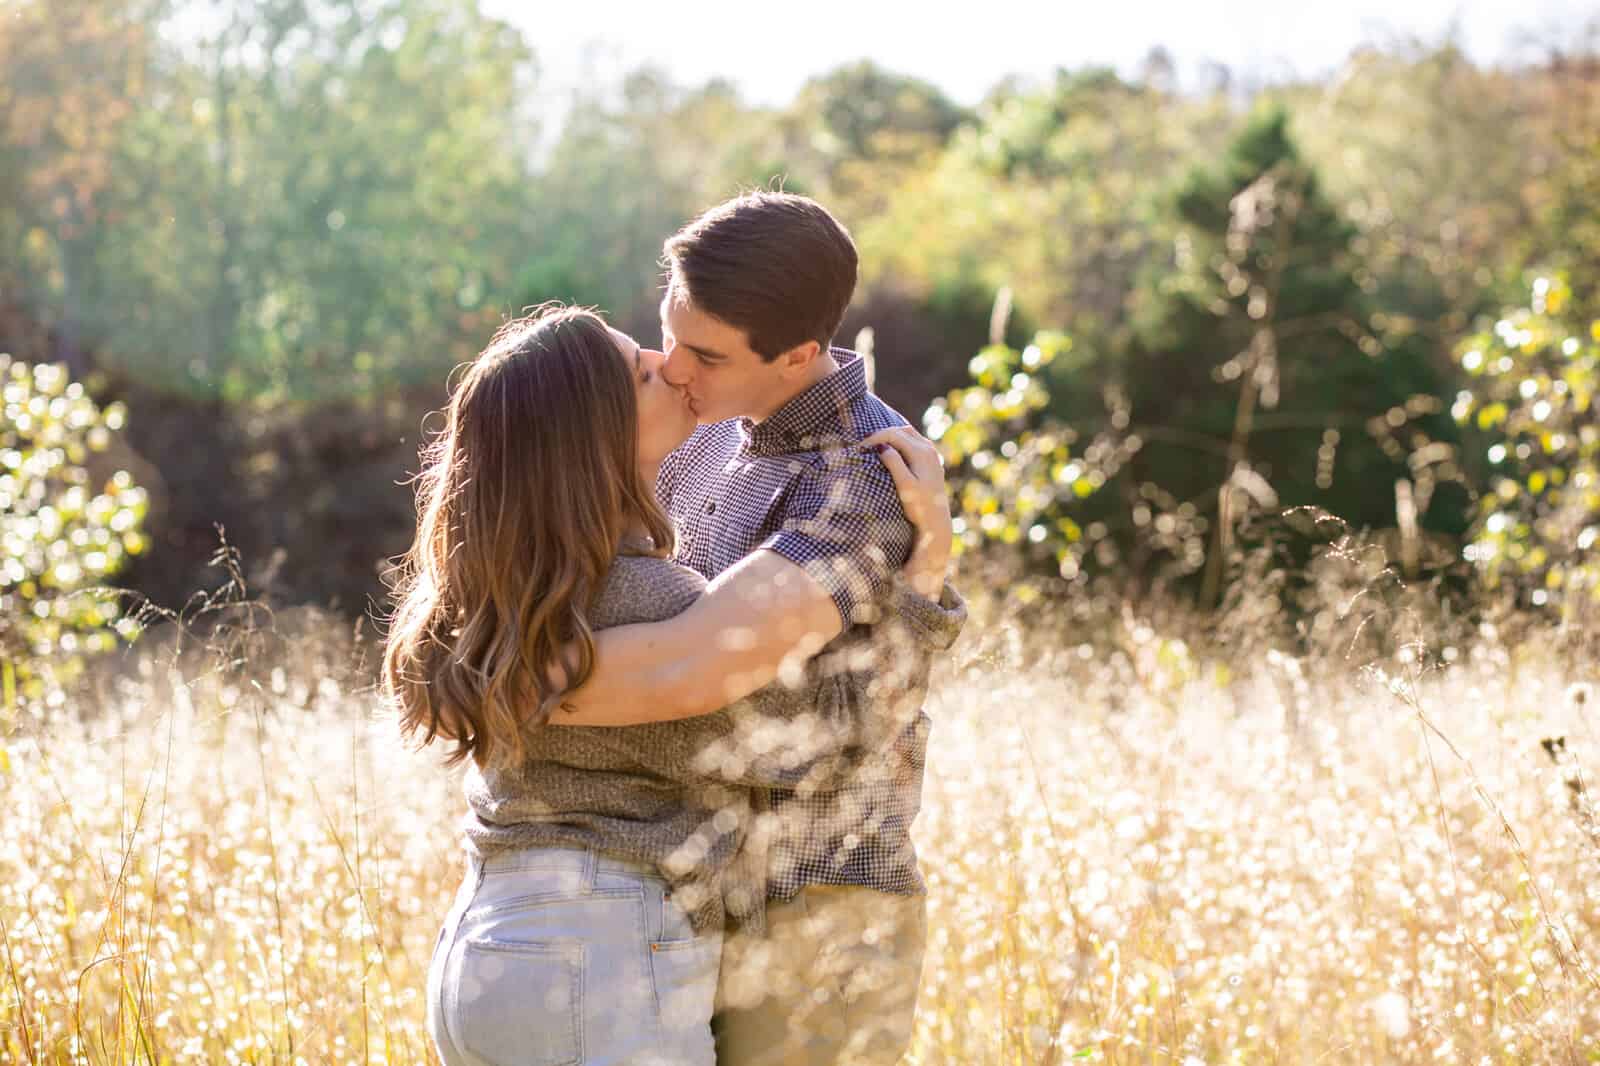 Young engaged girl with long brown hair kisses her fiance in a golden sunlit field.